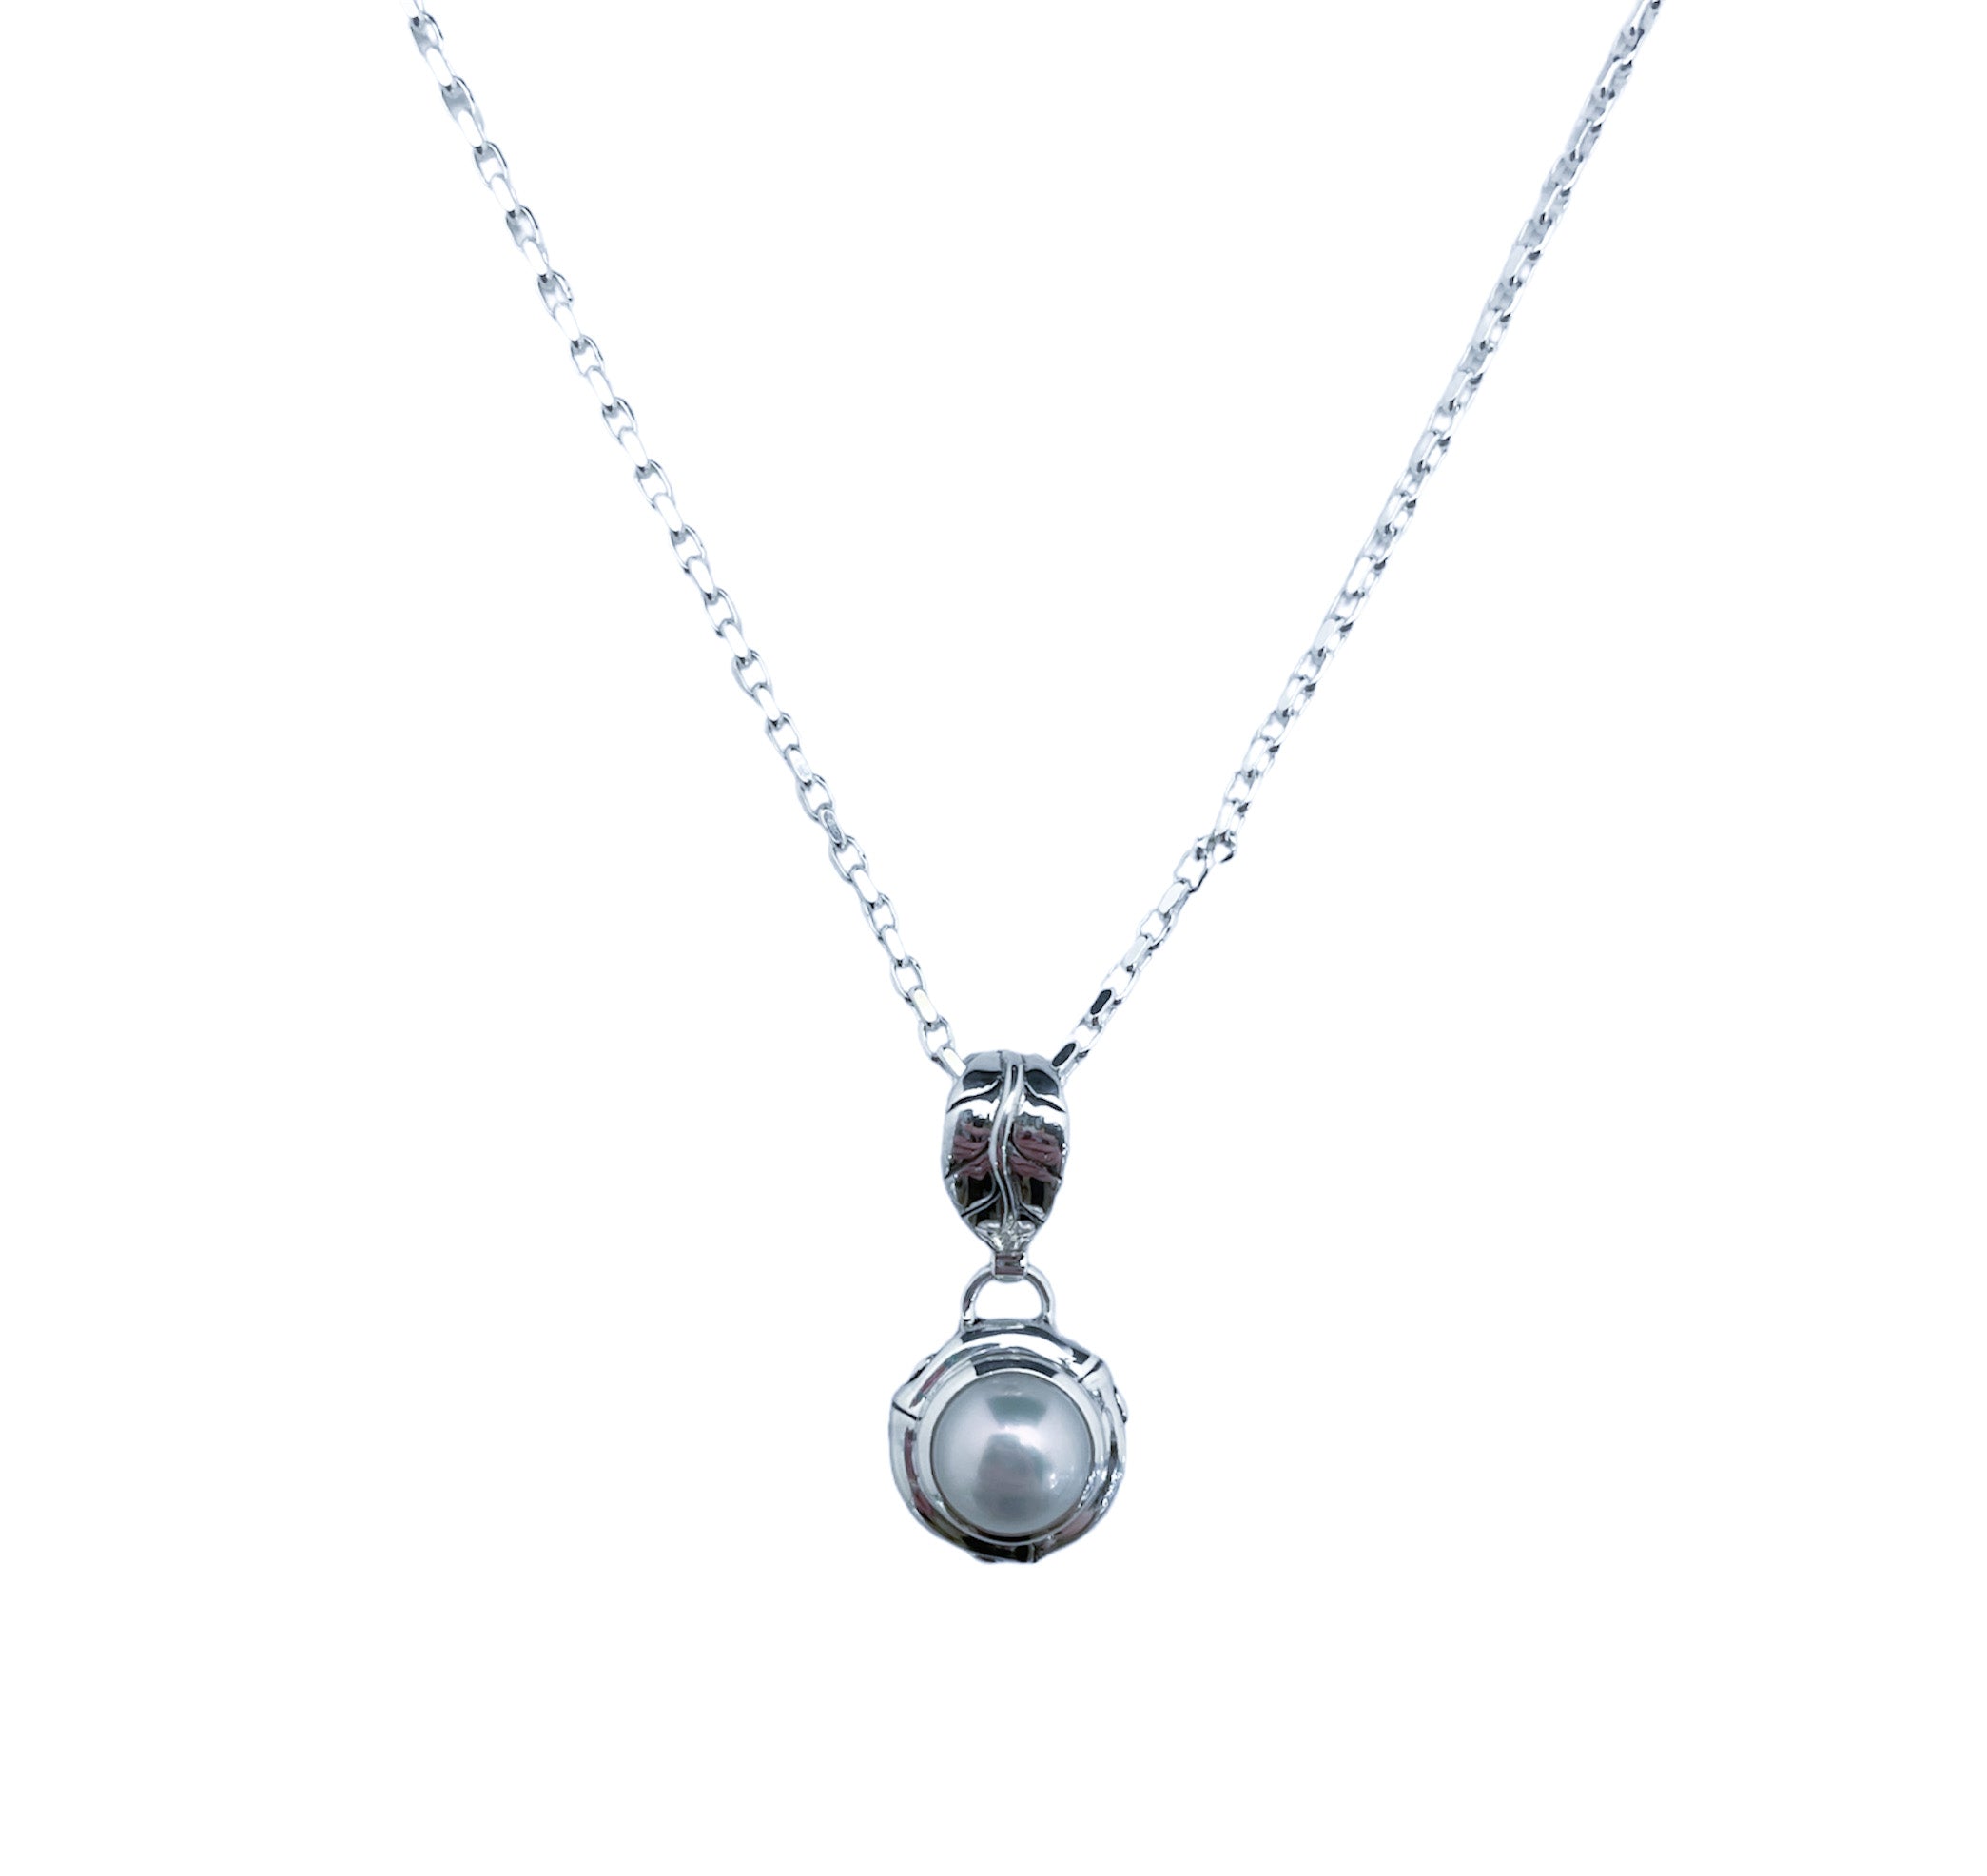 STERLING SILVER NECKLACE WITH FRESH WATER PEARL